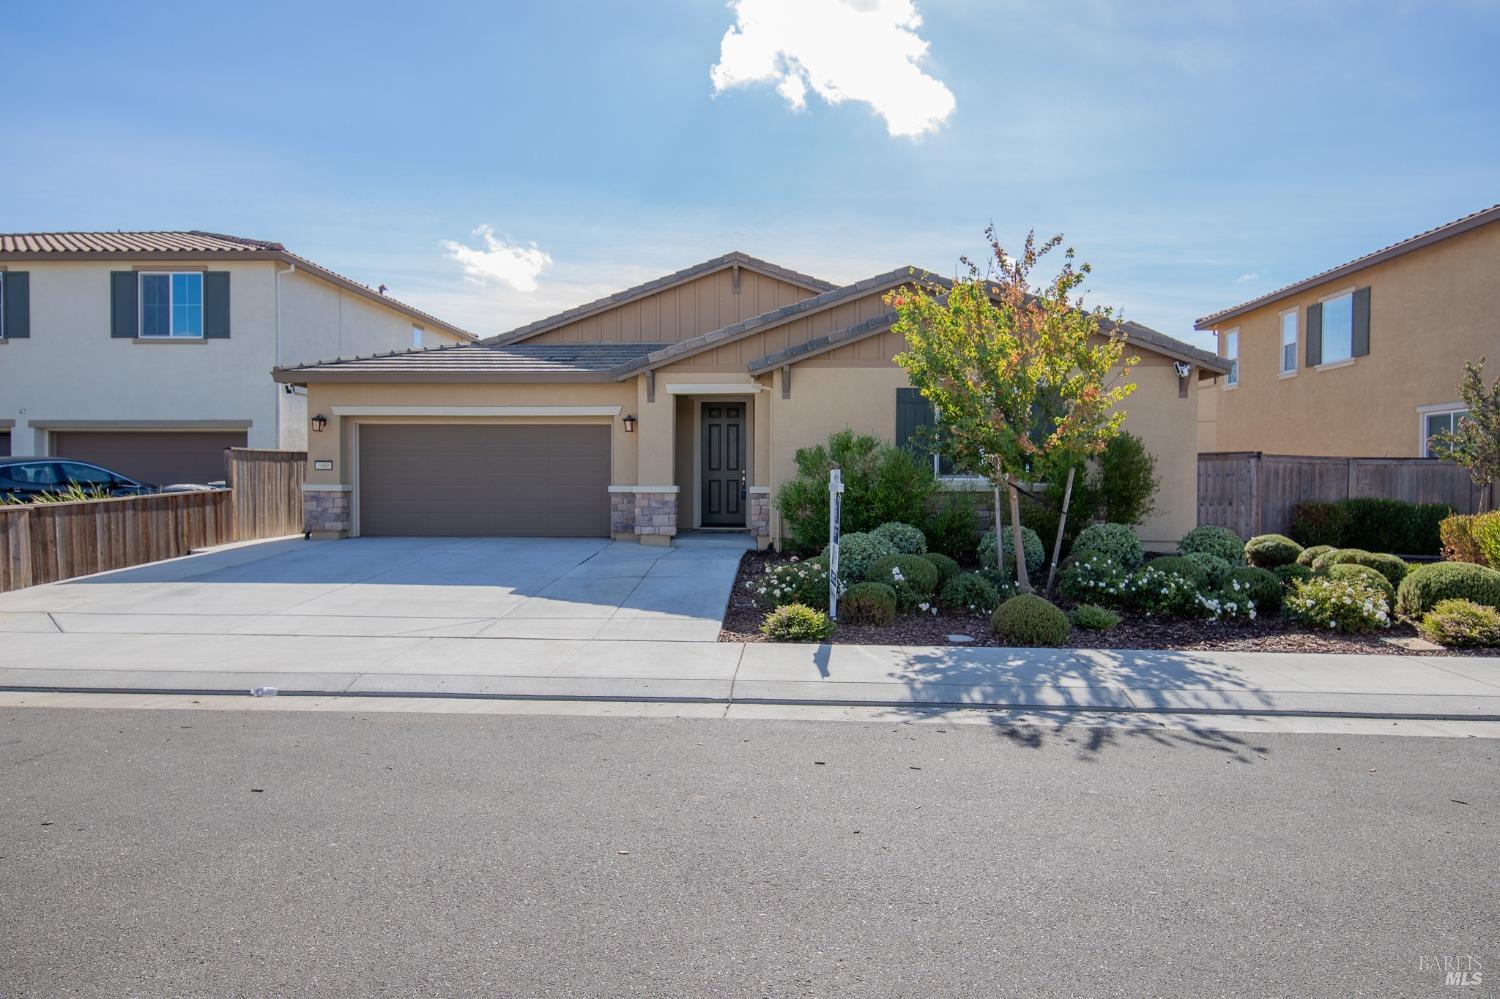 Welcome Home to this beautiful, spacious, Paige floorplan located in the desirable Valley Glen neigh